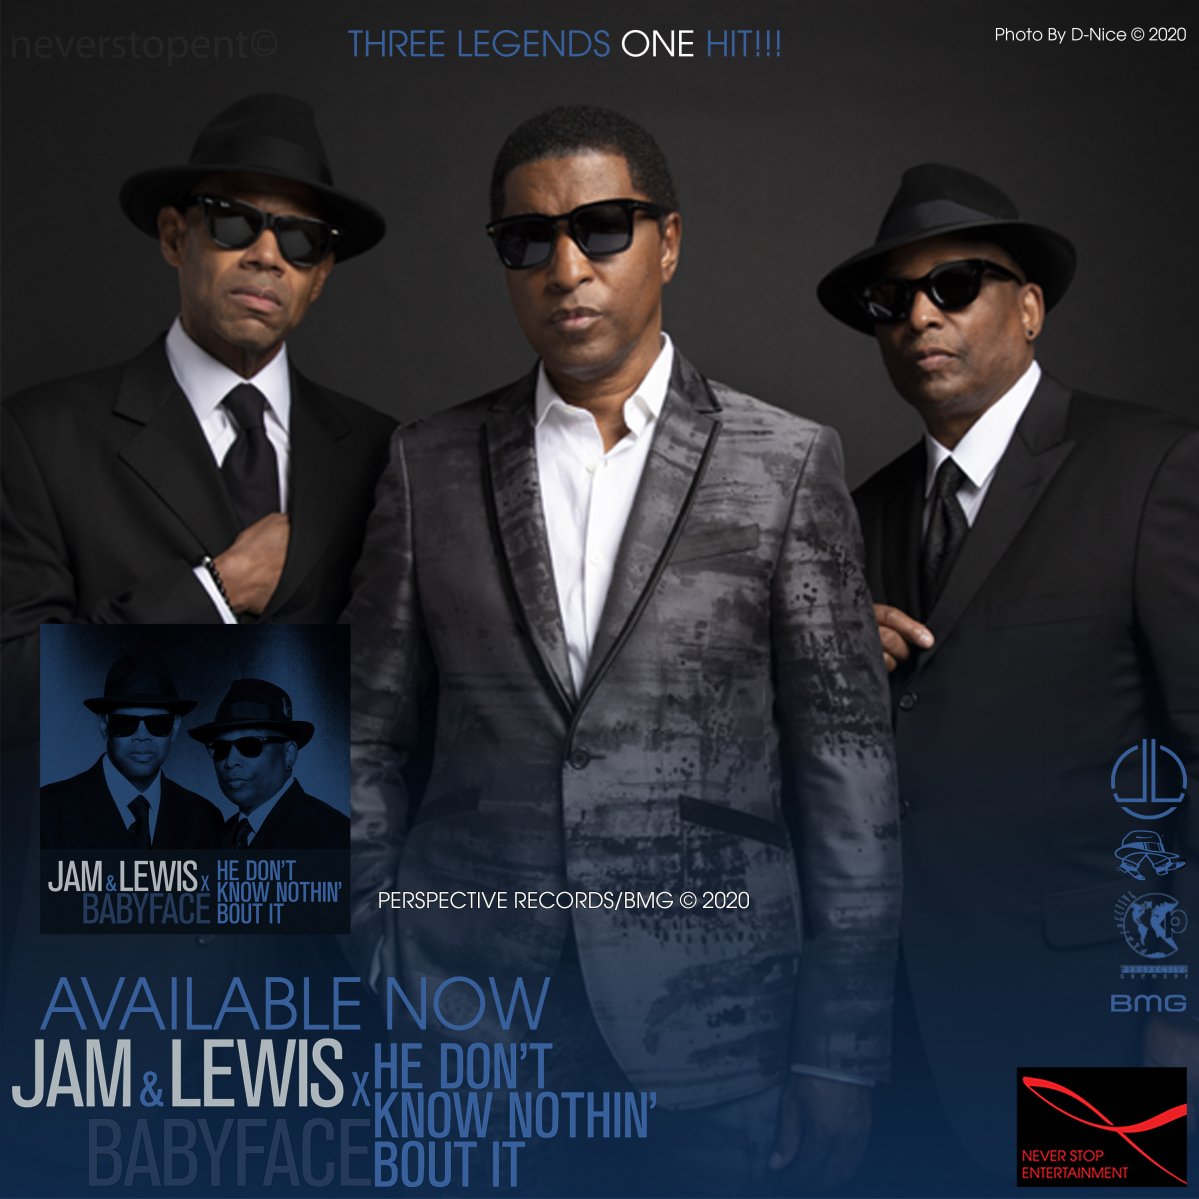 gallery/jam & lewis babyface he don't know nothin' about it an